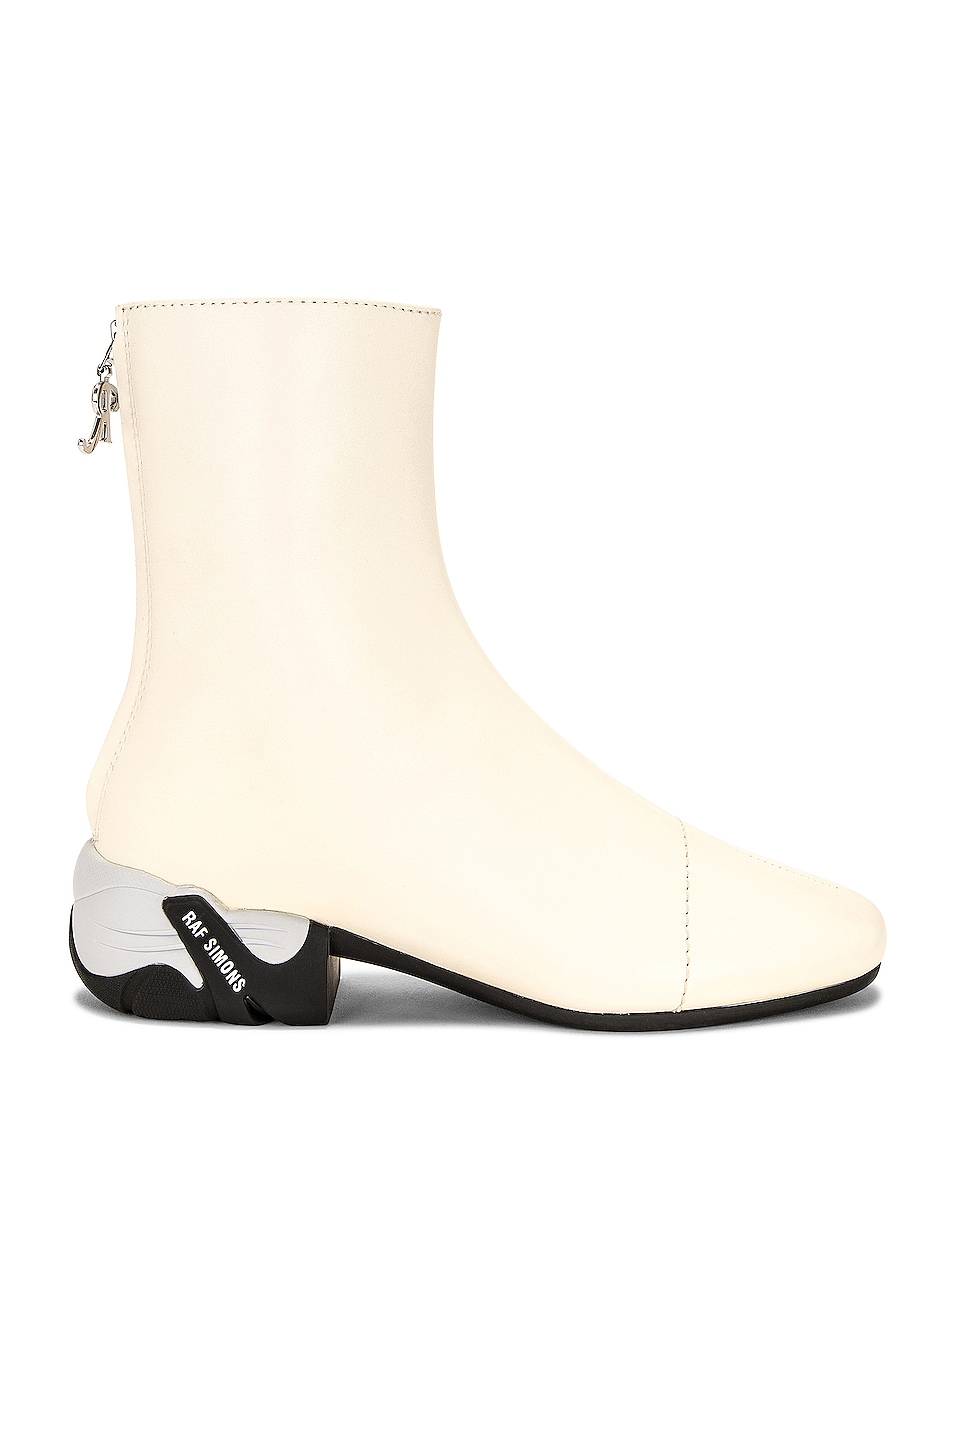 Image 1 of Raf Simons Solaris High Boots in Cream & Soft Grey